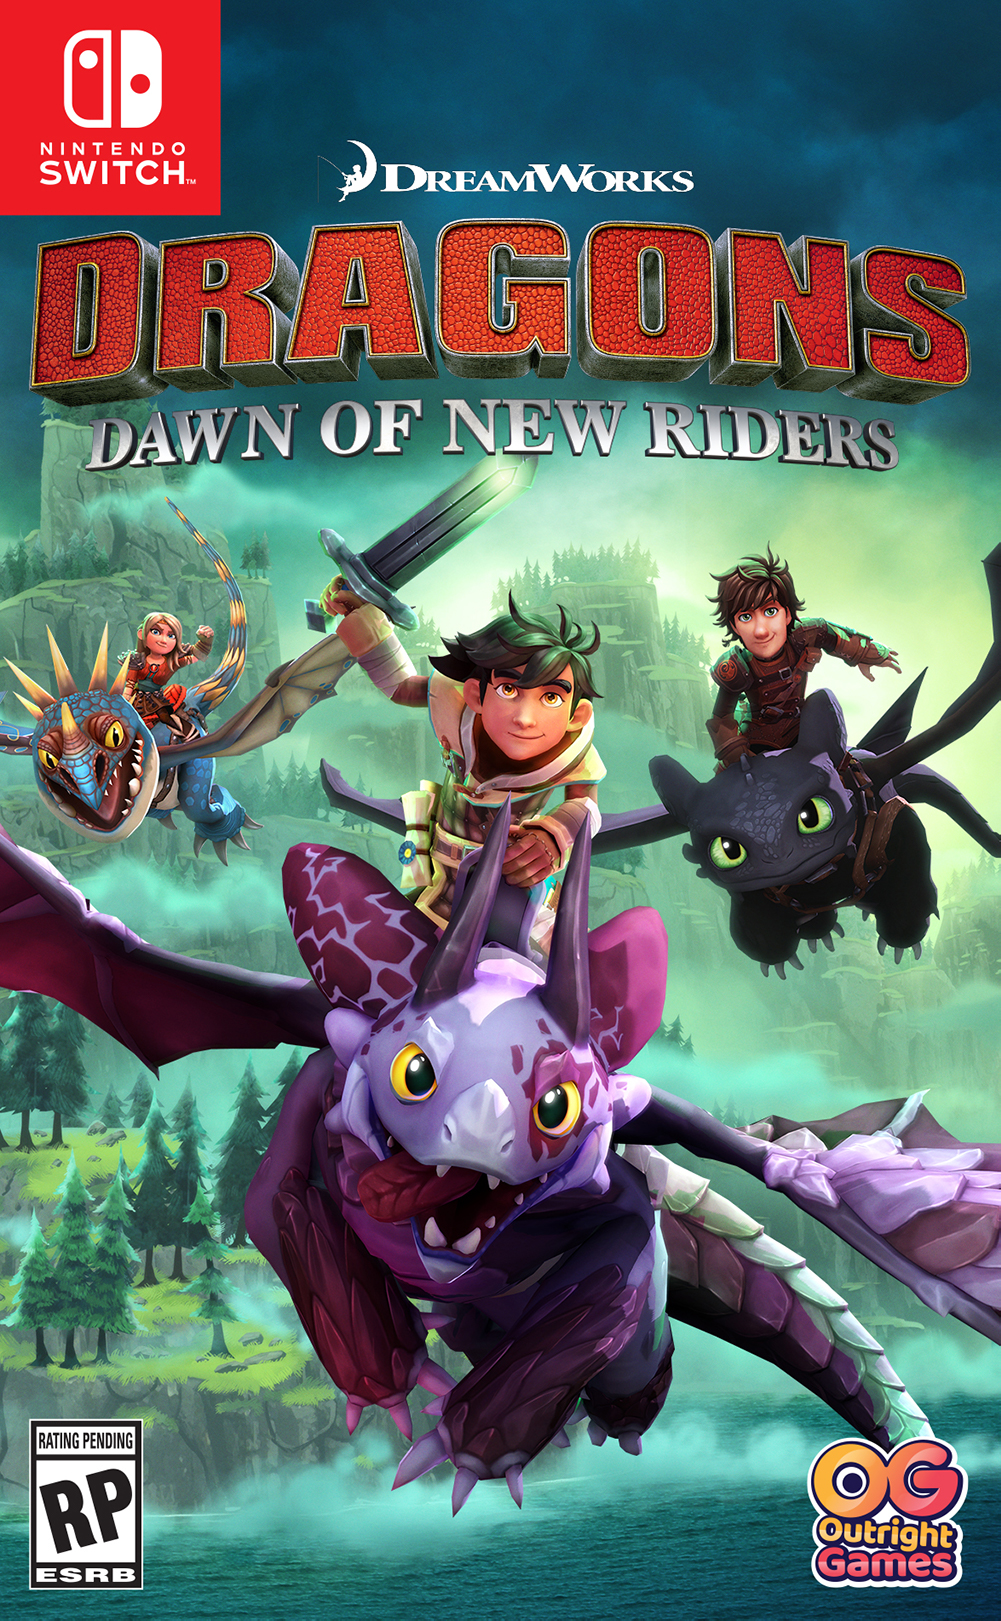 [PC] DreamWorks Dragons Dawn of New Riders - 2019